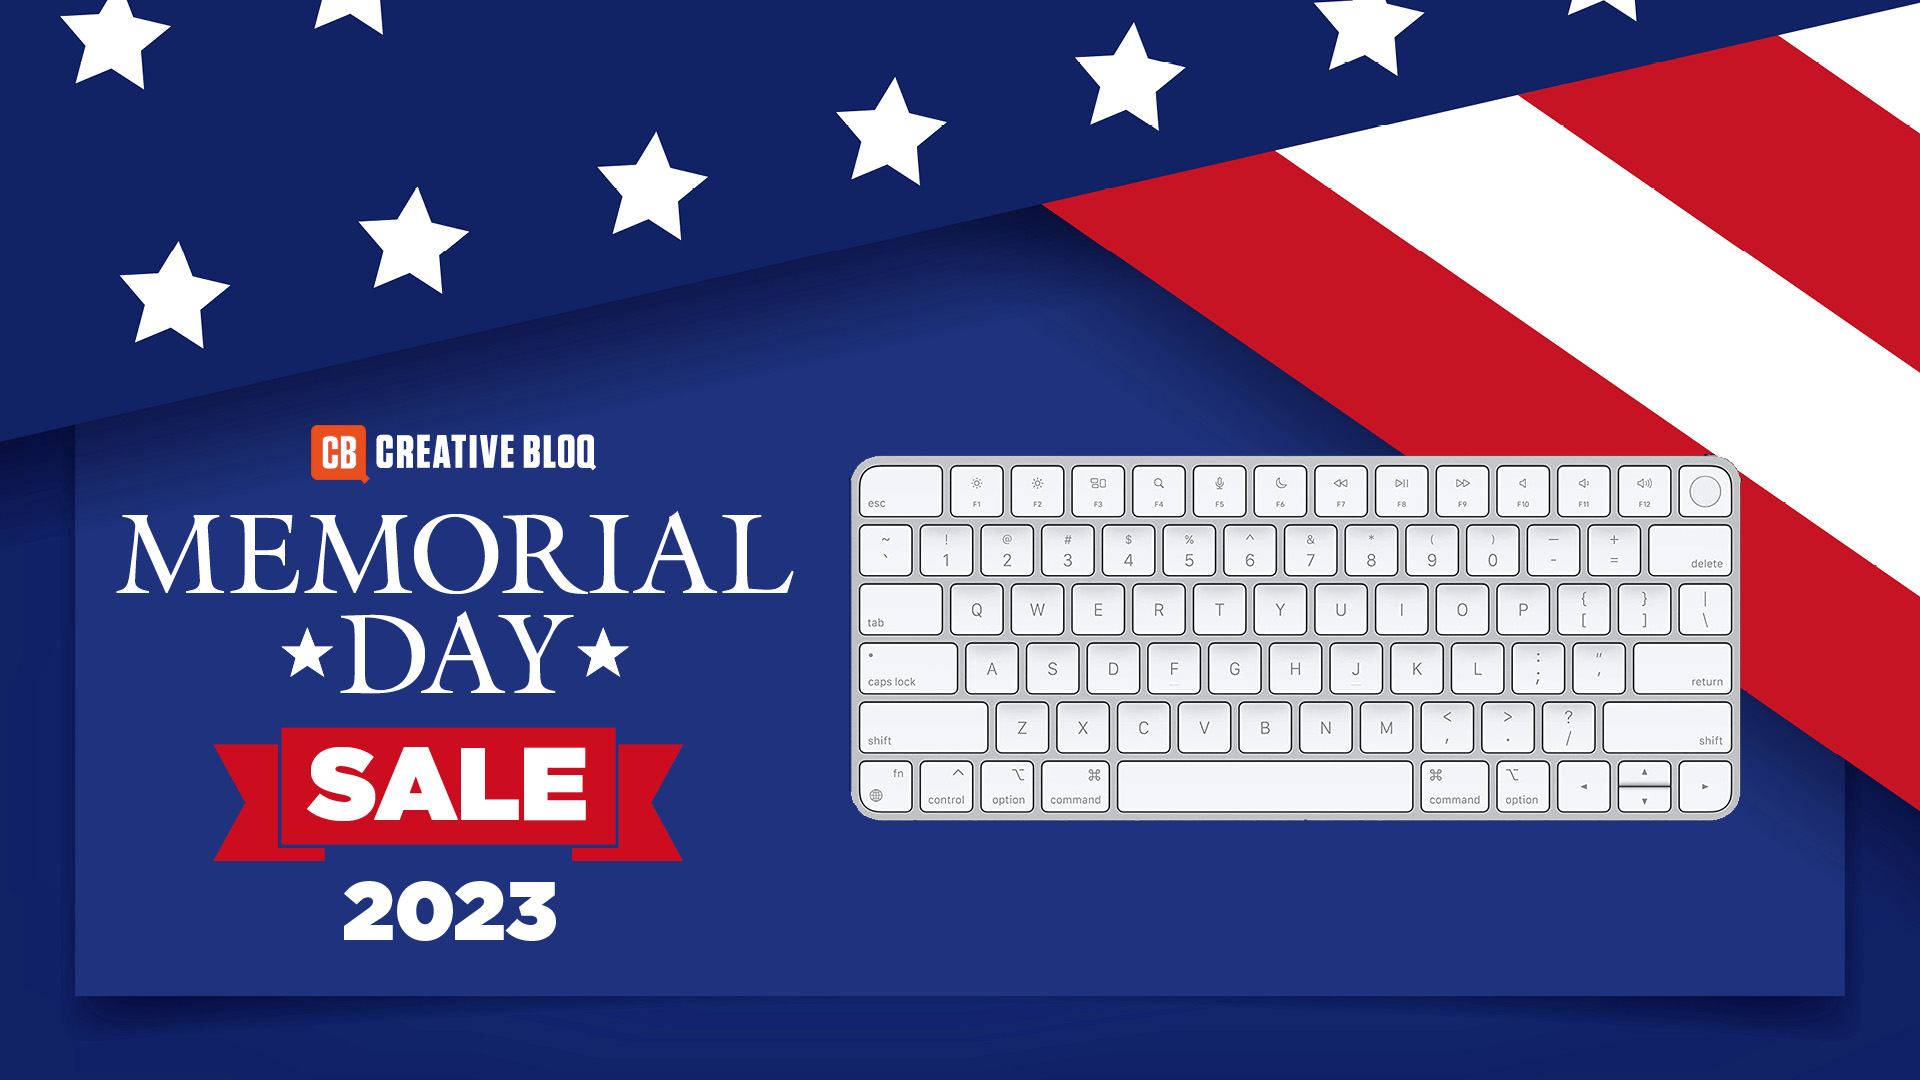 Apple Magic Keyboard on a Memorial Day 2023 background with stars and stripes